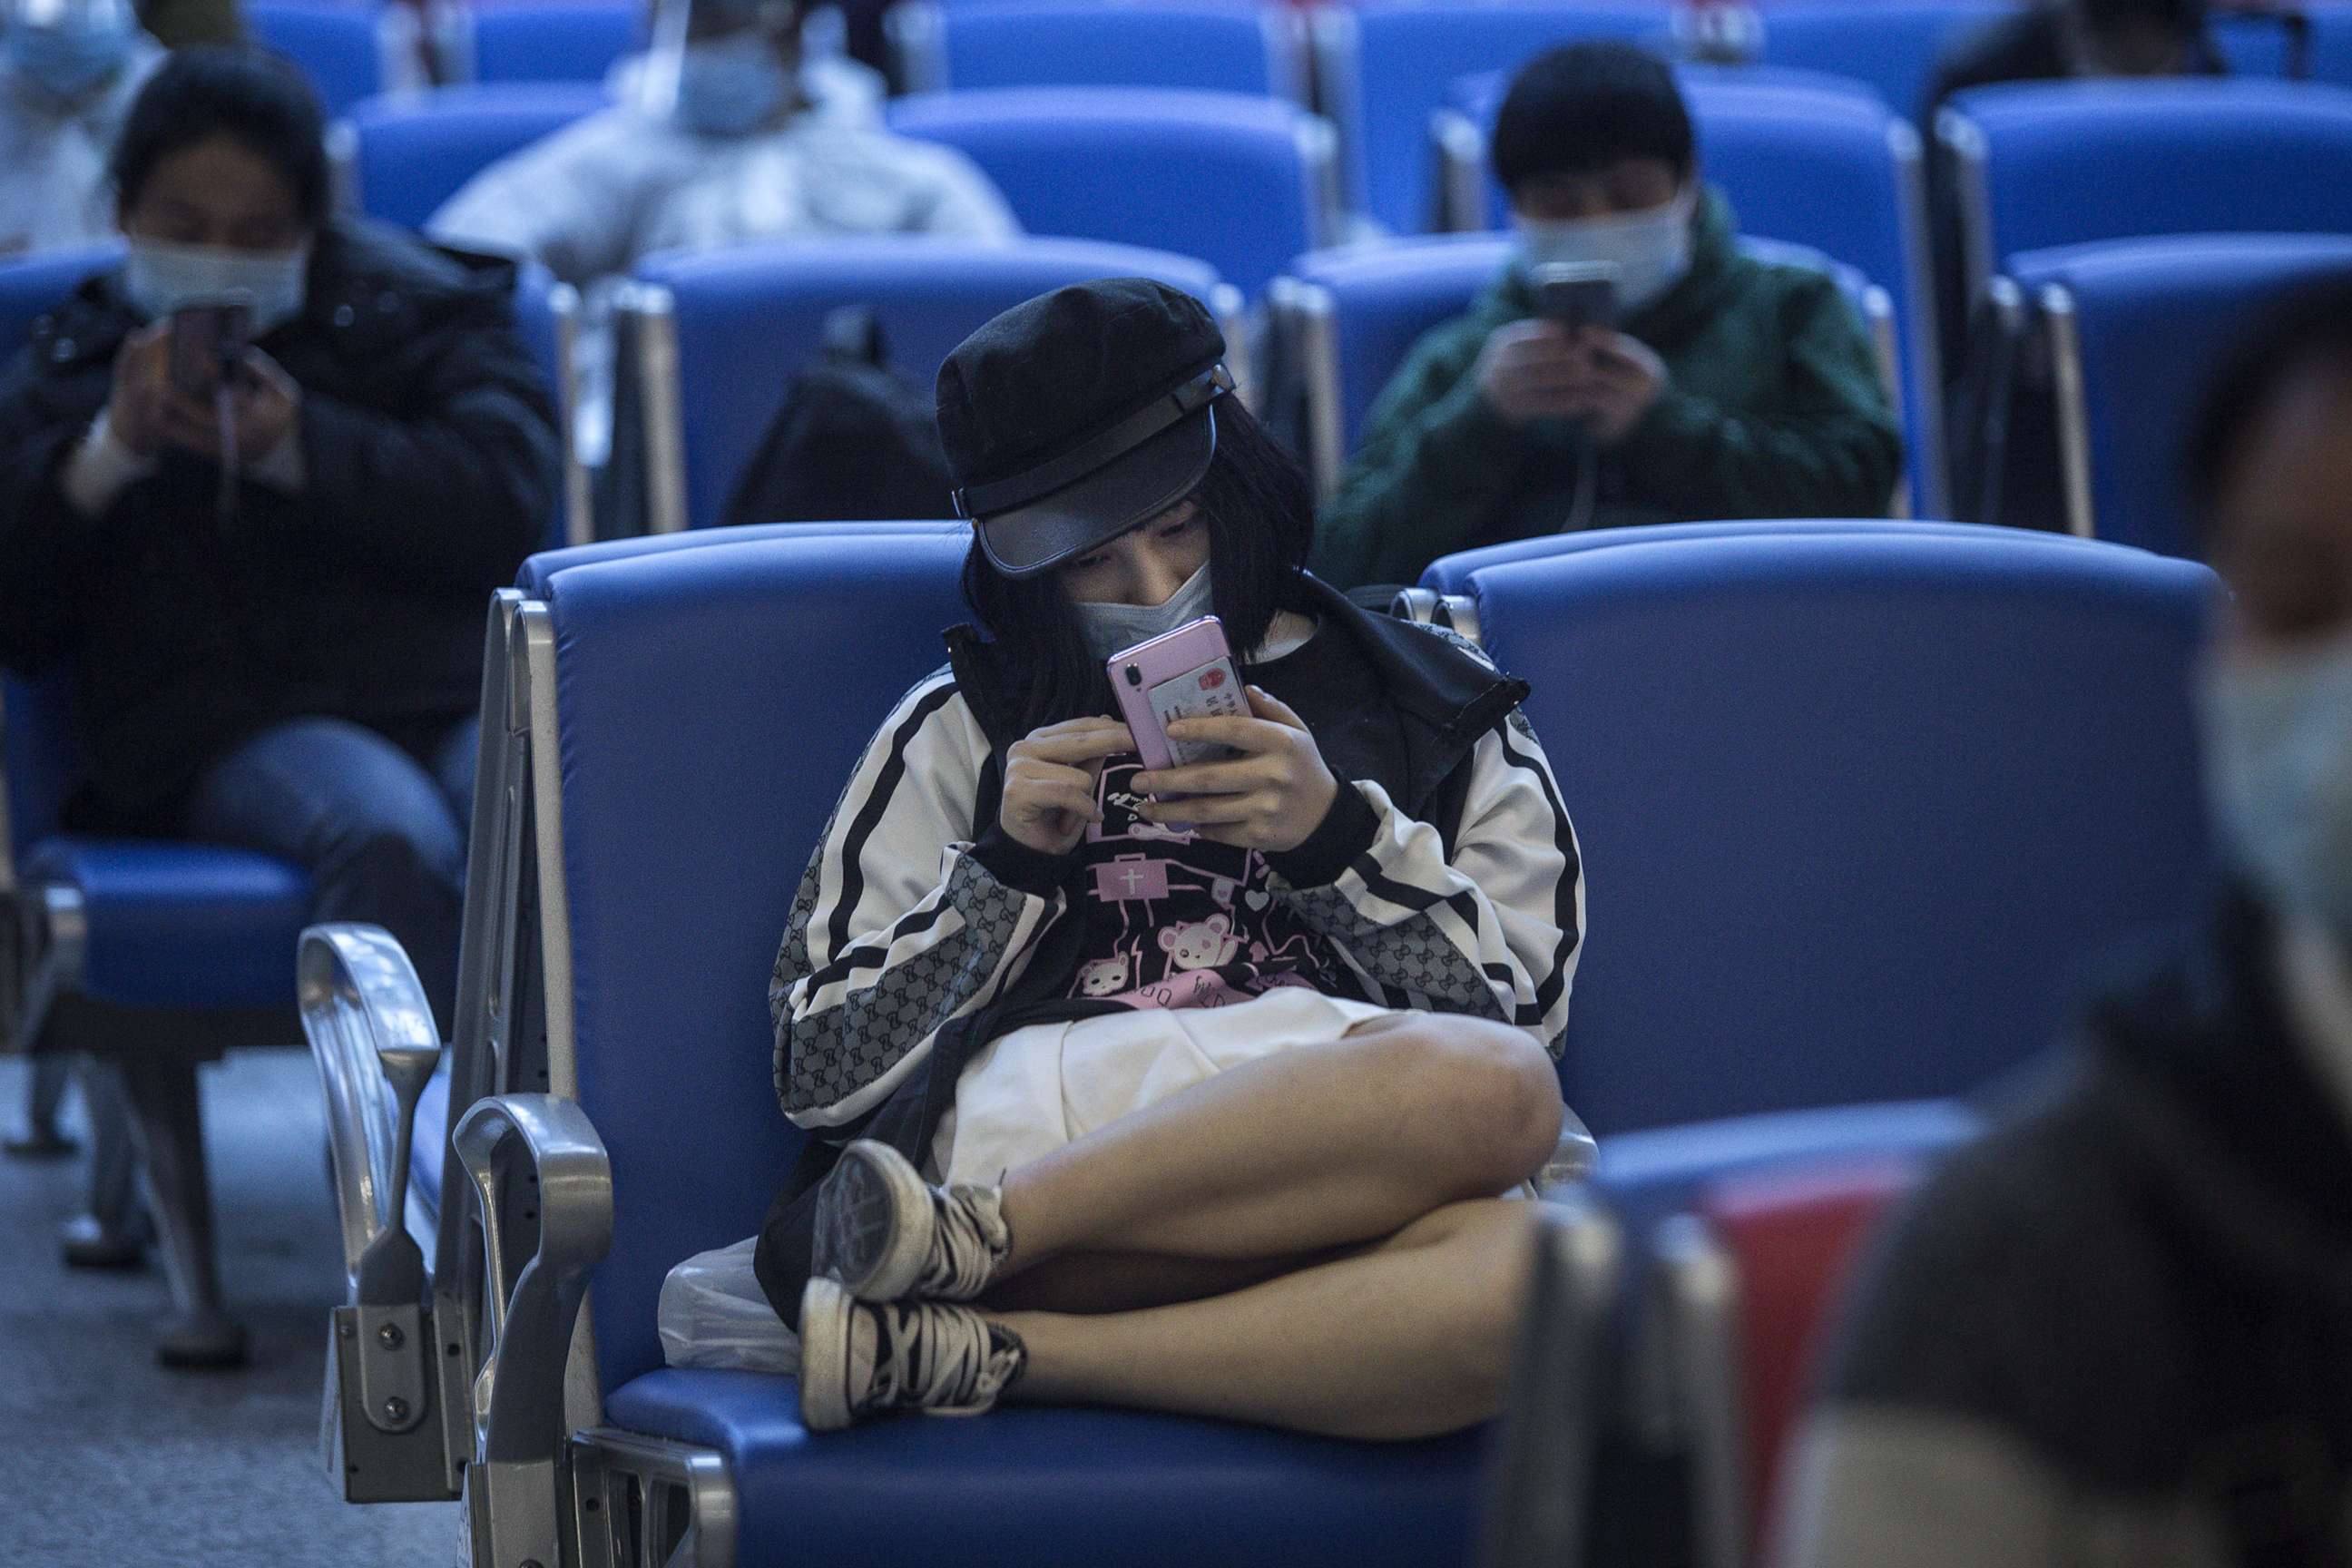 PHOTO: A passenger uses an iPhone while sitting in a waiting room at a railway station on April 7,2020.